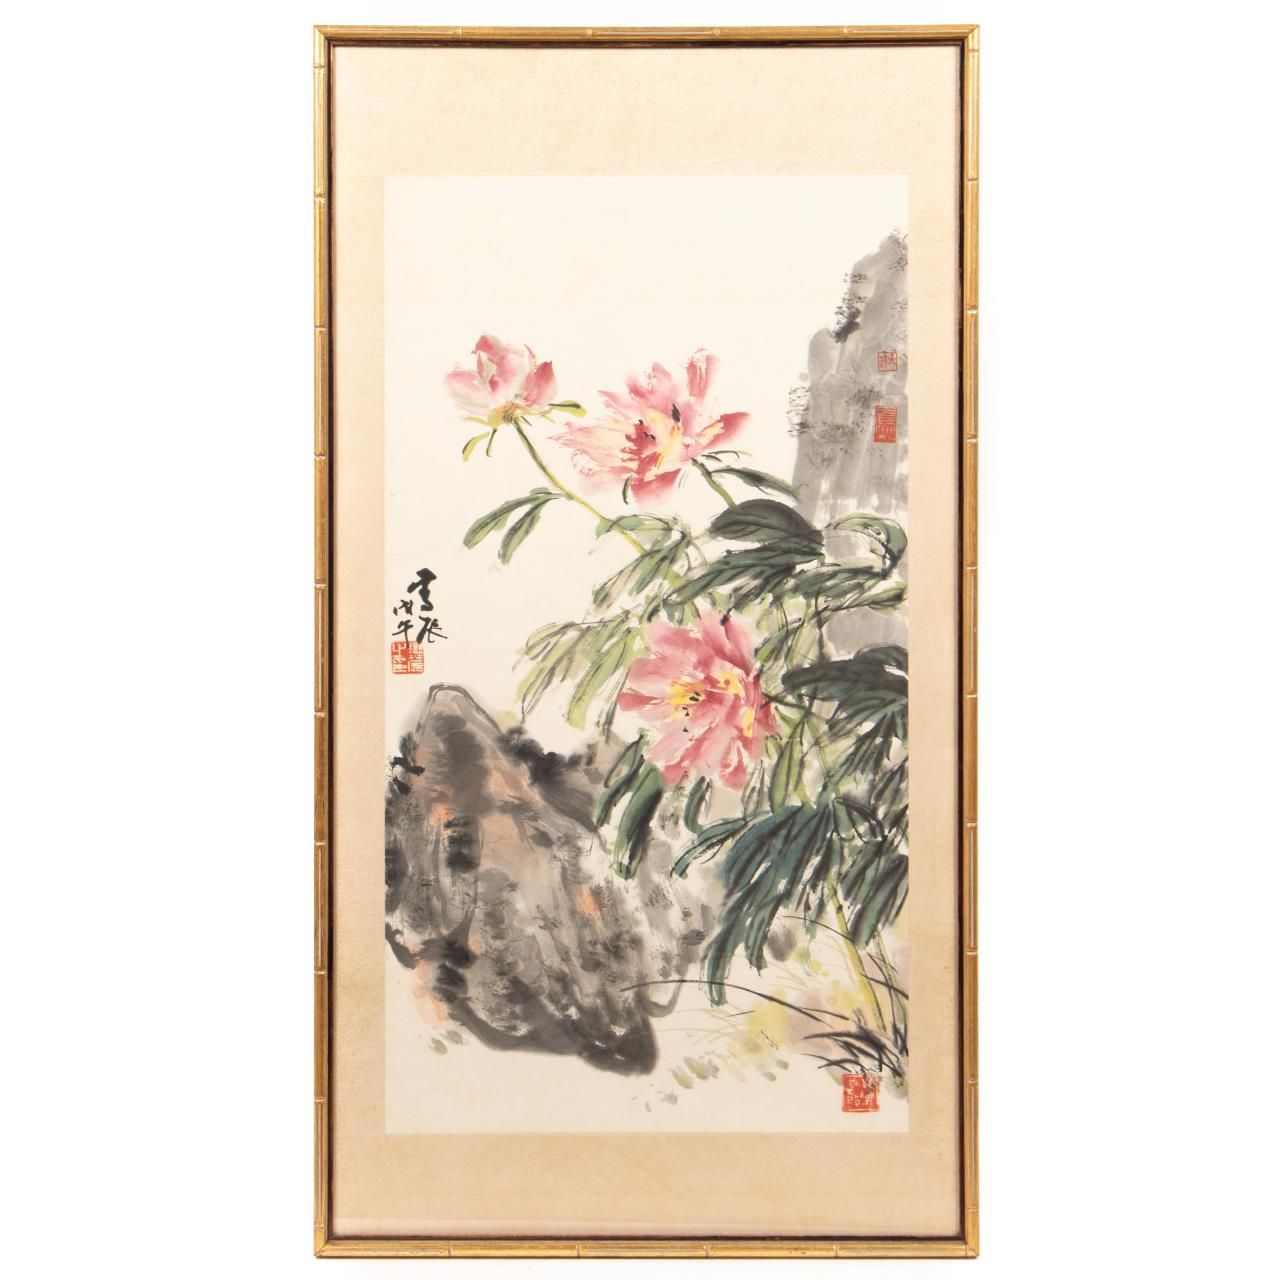 FRAMED CHINESE SCROLL WITH FLORALS 35d9ec